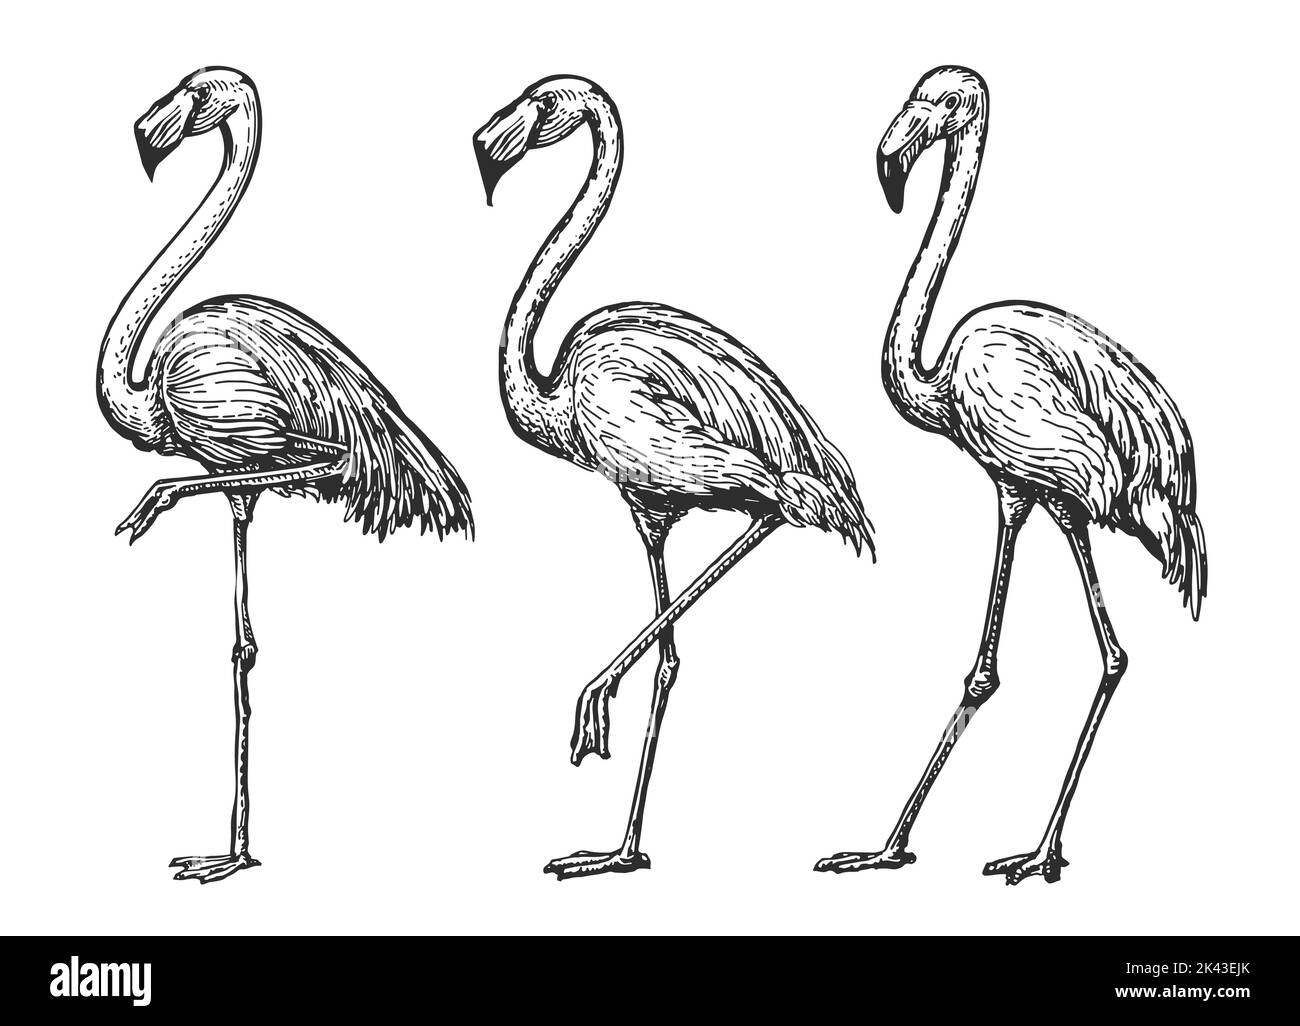 Flamingo sketch. Exotic tropical birds set. Isolated wildlife animals vector illustration in vintage engraving style Stock Vector